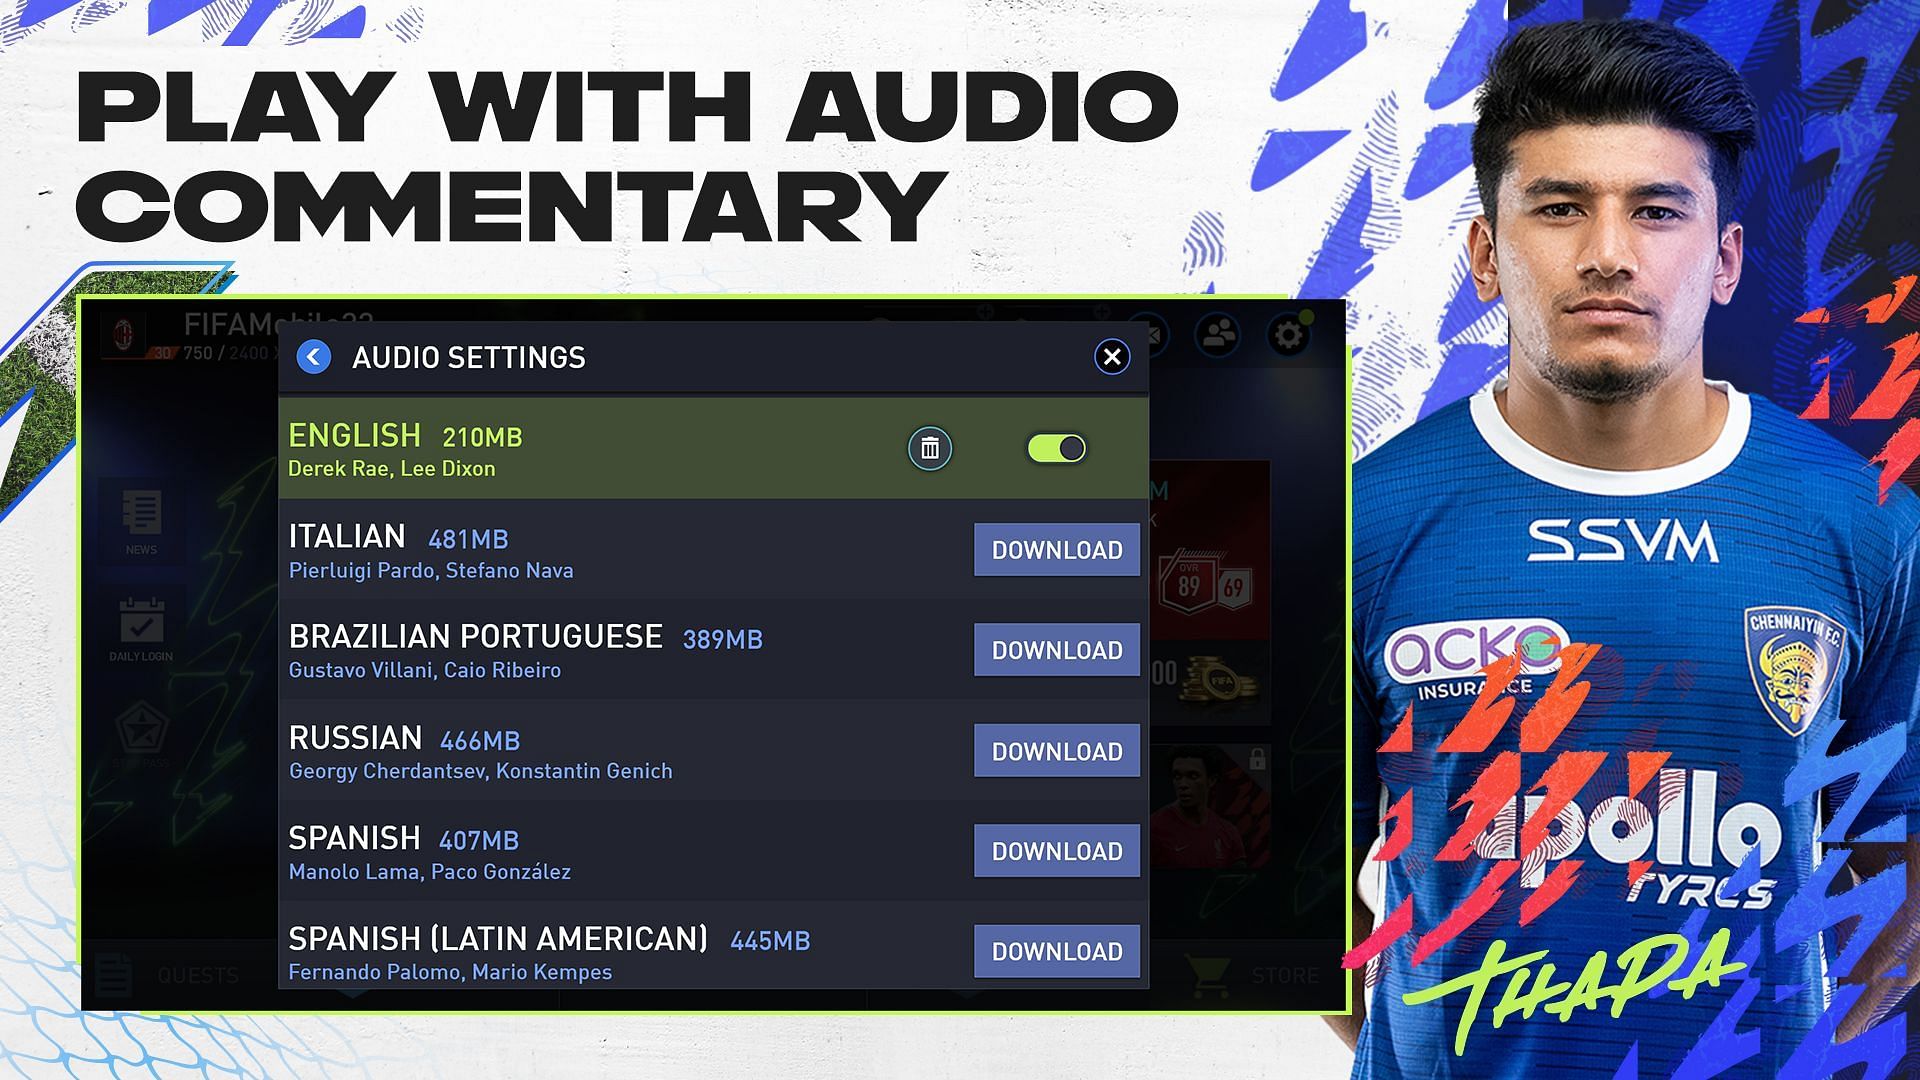 Audio commentary is available in multiple languages (Image via Sportskeeda)